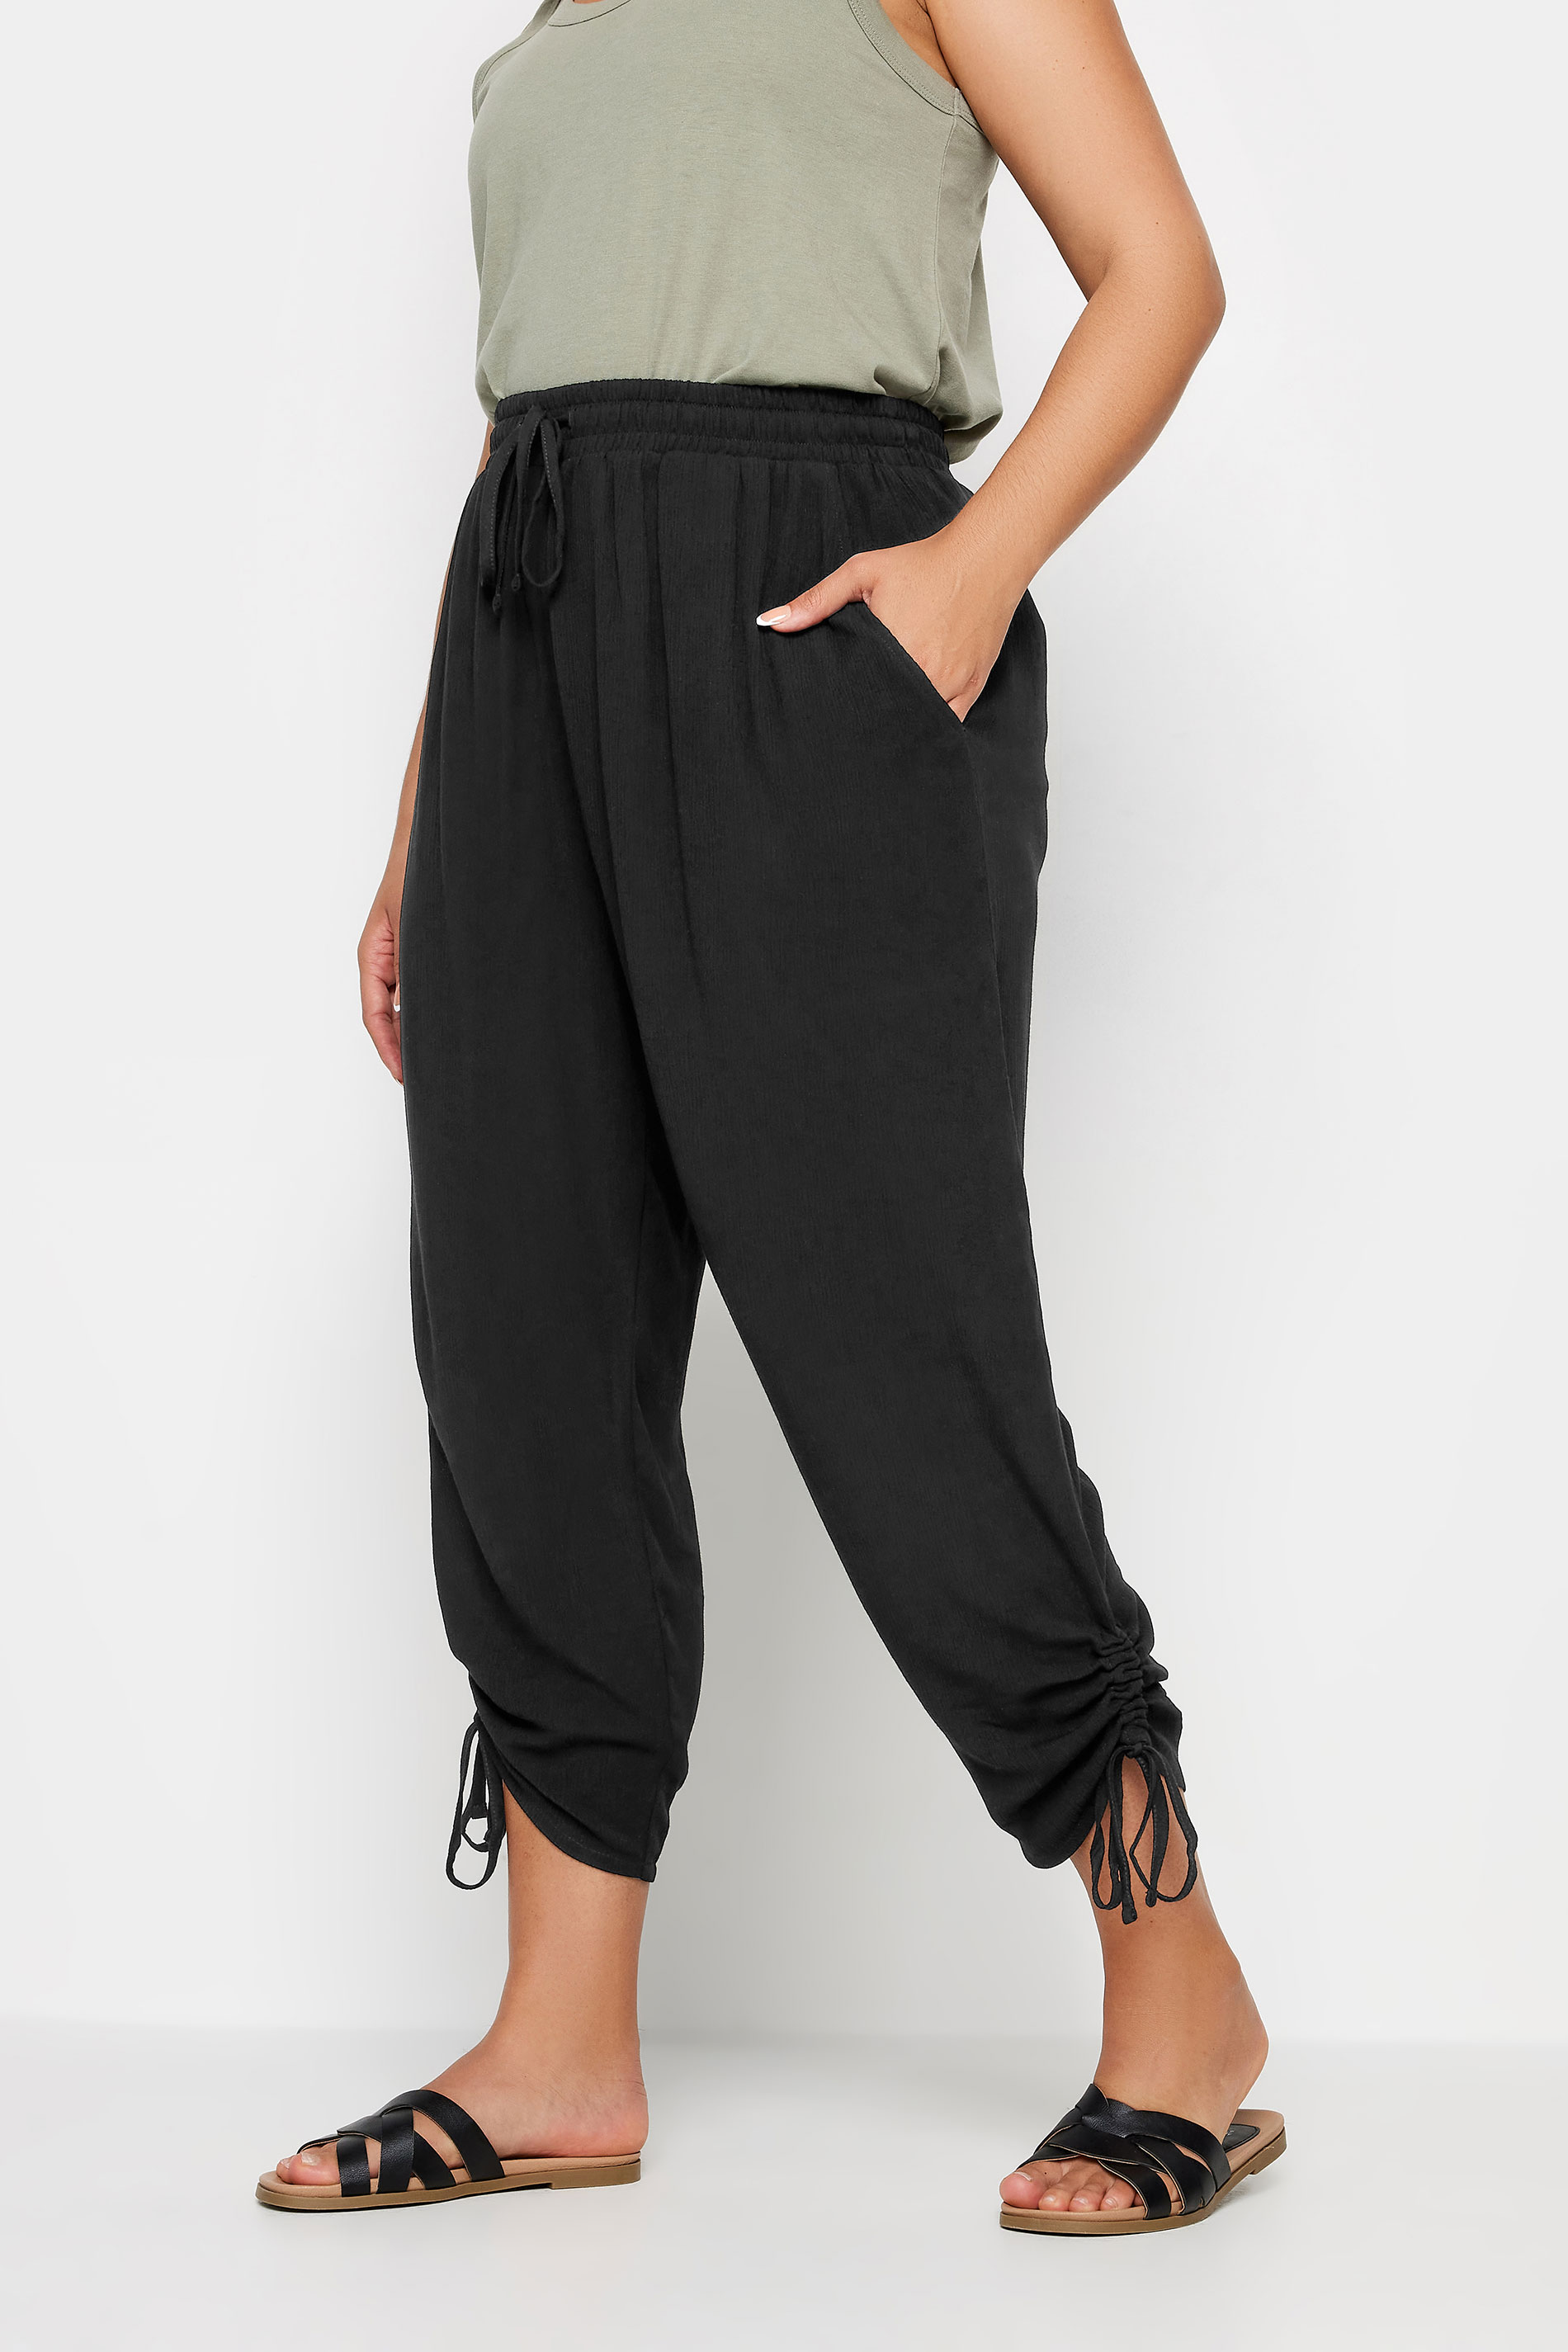 YOURS Plus Size Black Crinkle Ruched Cropped Trousers | Yours Clothing 1